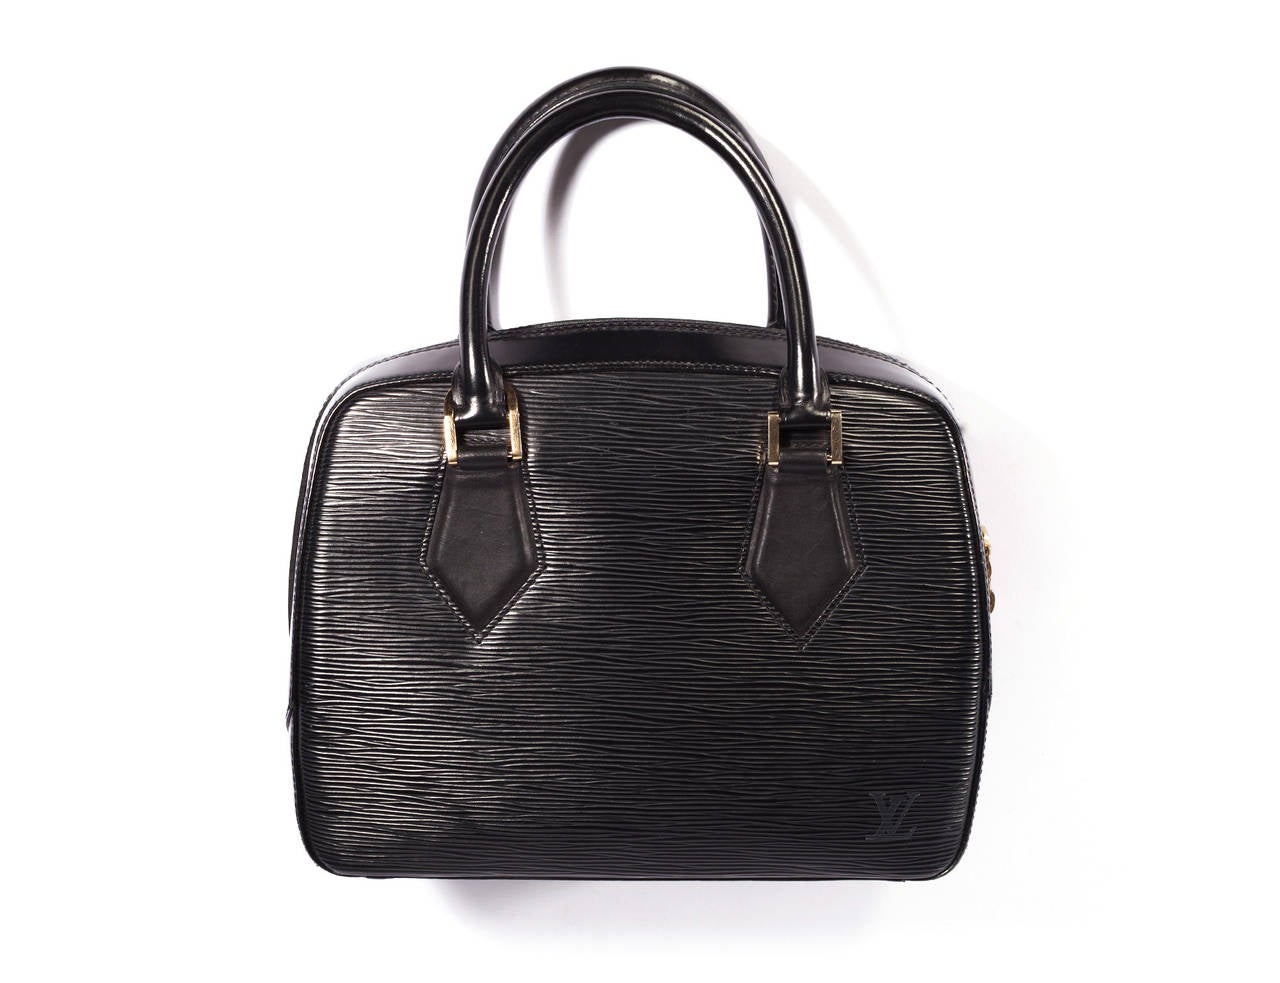 Louis Vuitton Epi Black Speedy shape bag. This bag has an unusual shape and we assume that it is rare. Zipper is in classic gold tone with pull and has grey lining. It has metal extensions for clipping straps, yet no straps available with bag.